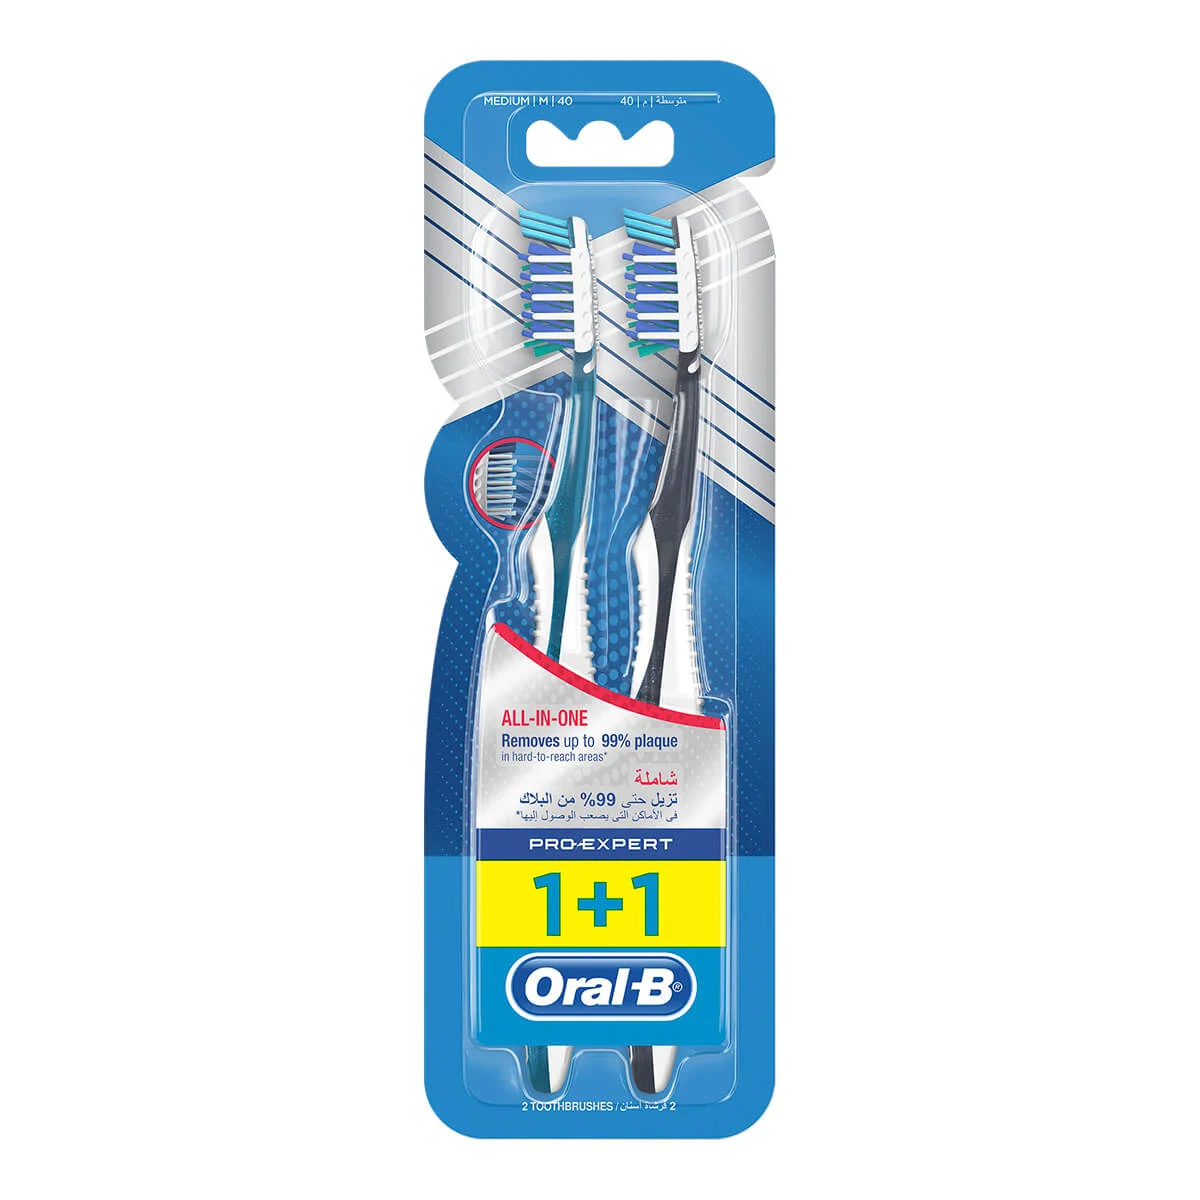 Oral-B Pro-Expert All In One Manual Toothbrush undefined